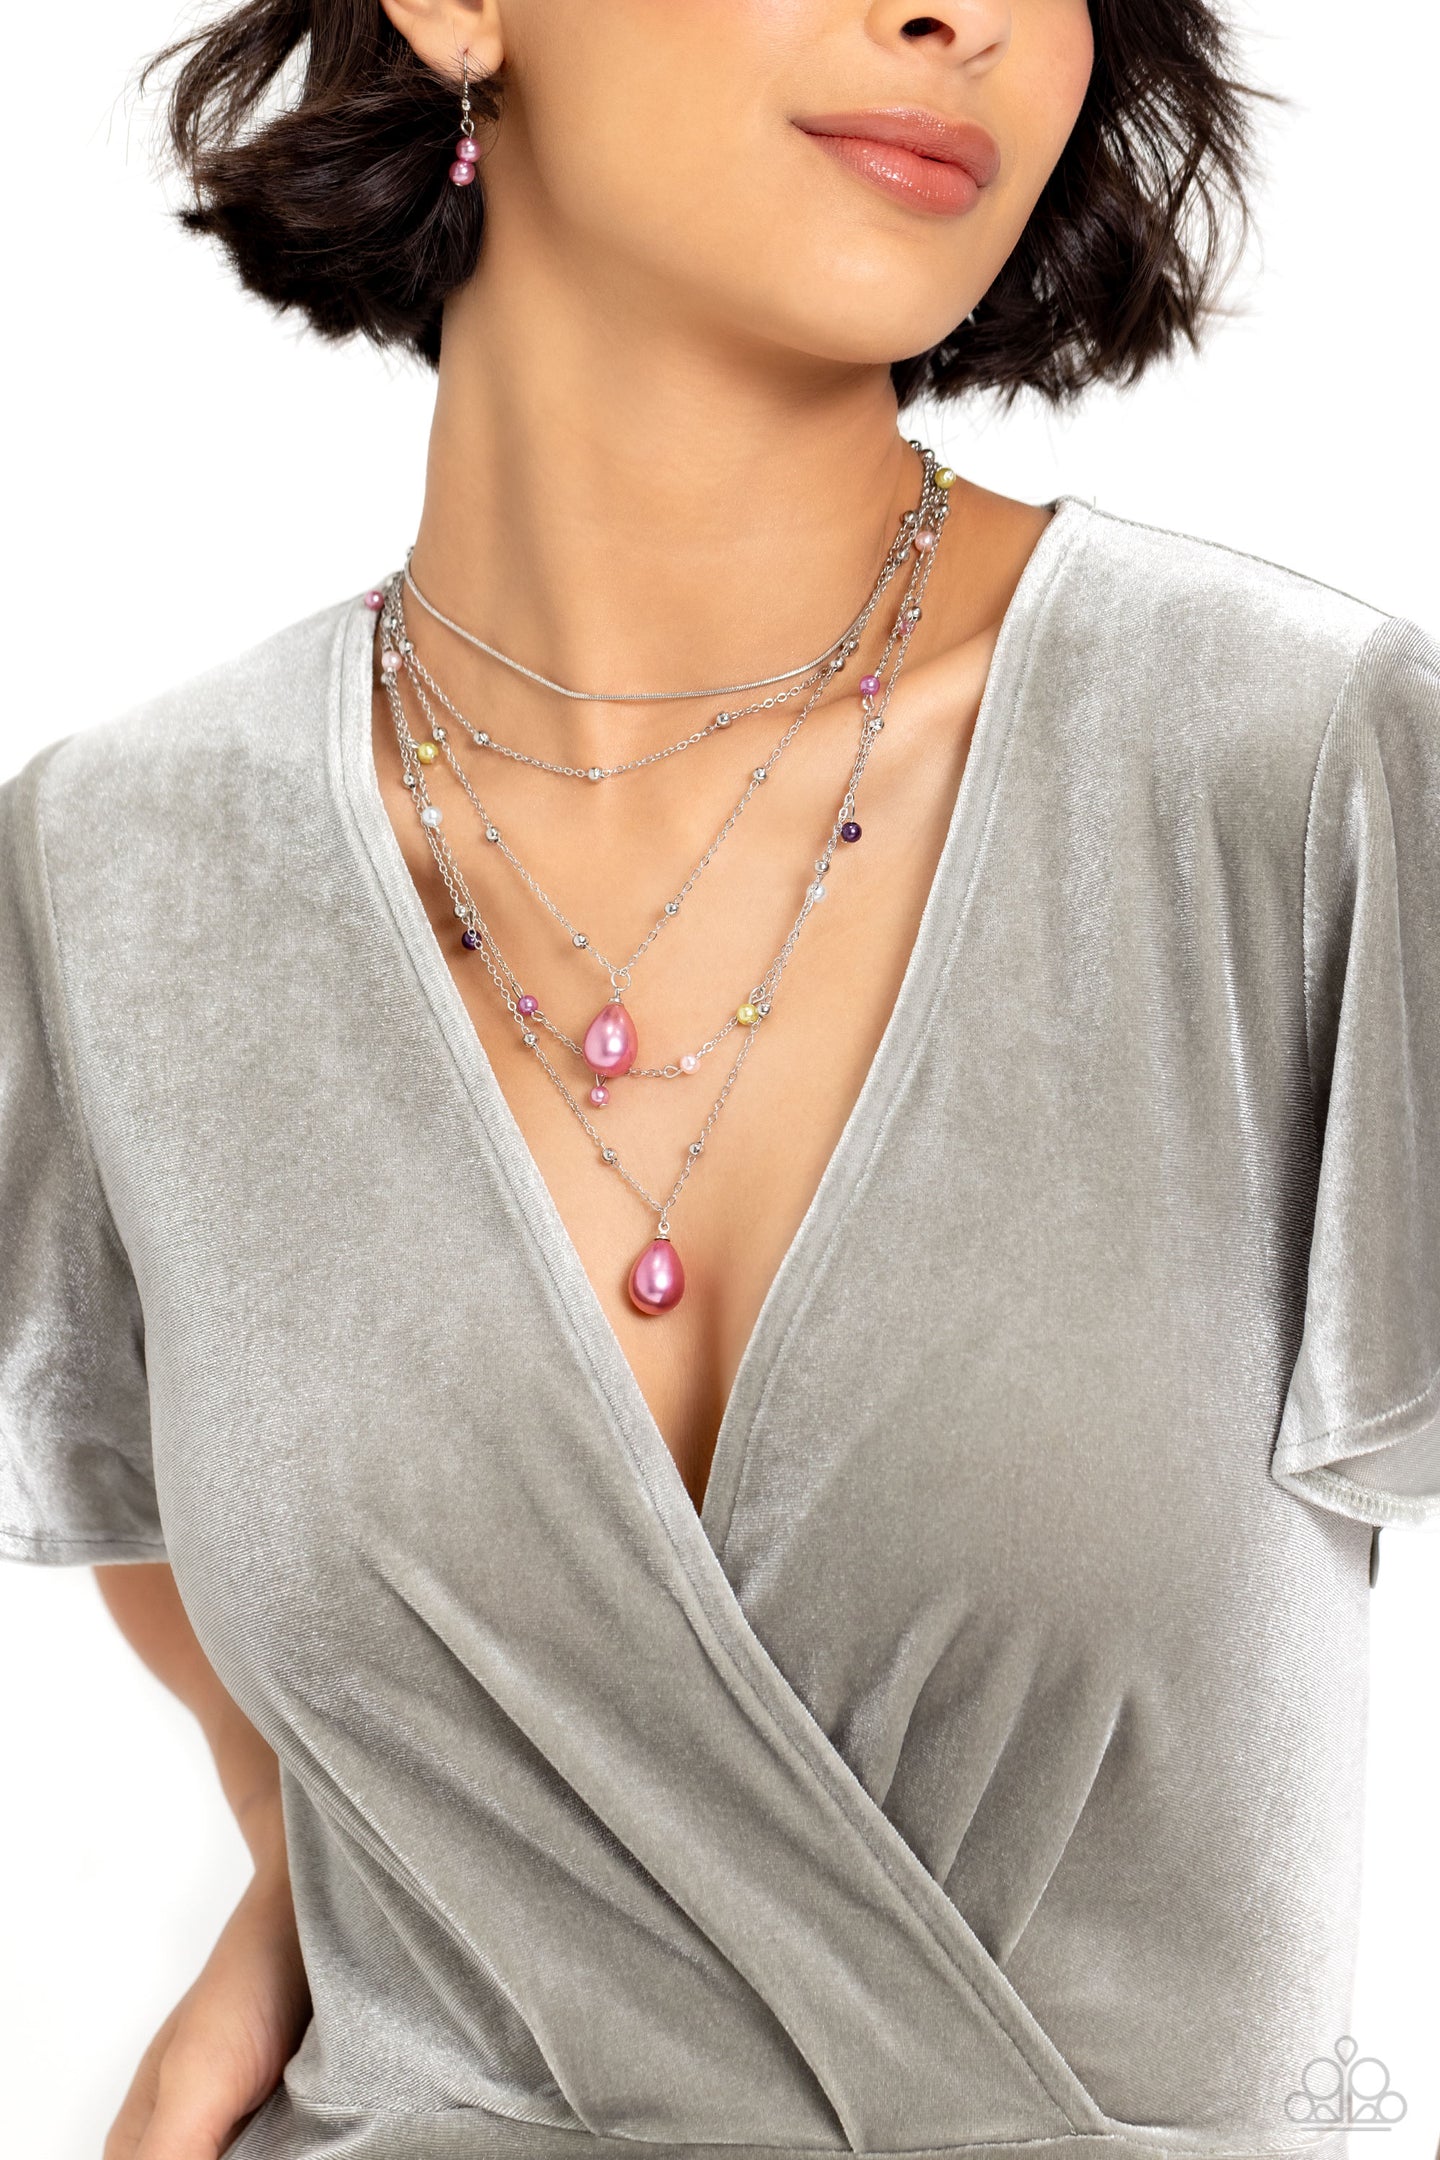 SASS with Flying Colors - Multi necklace